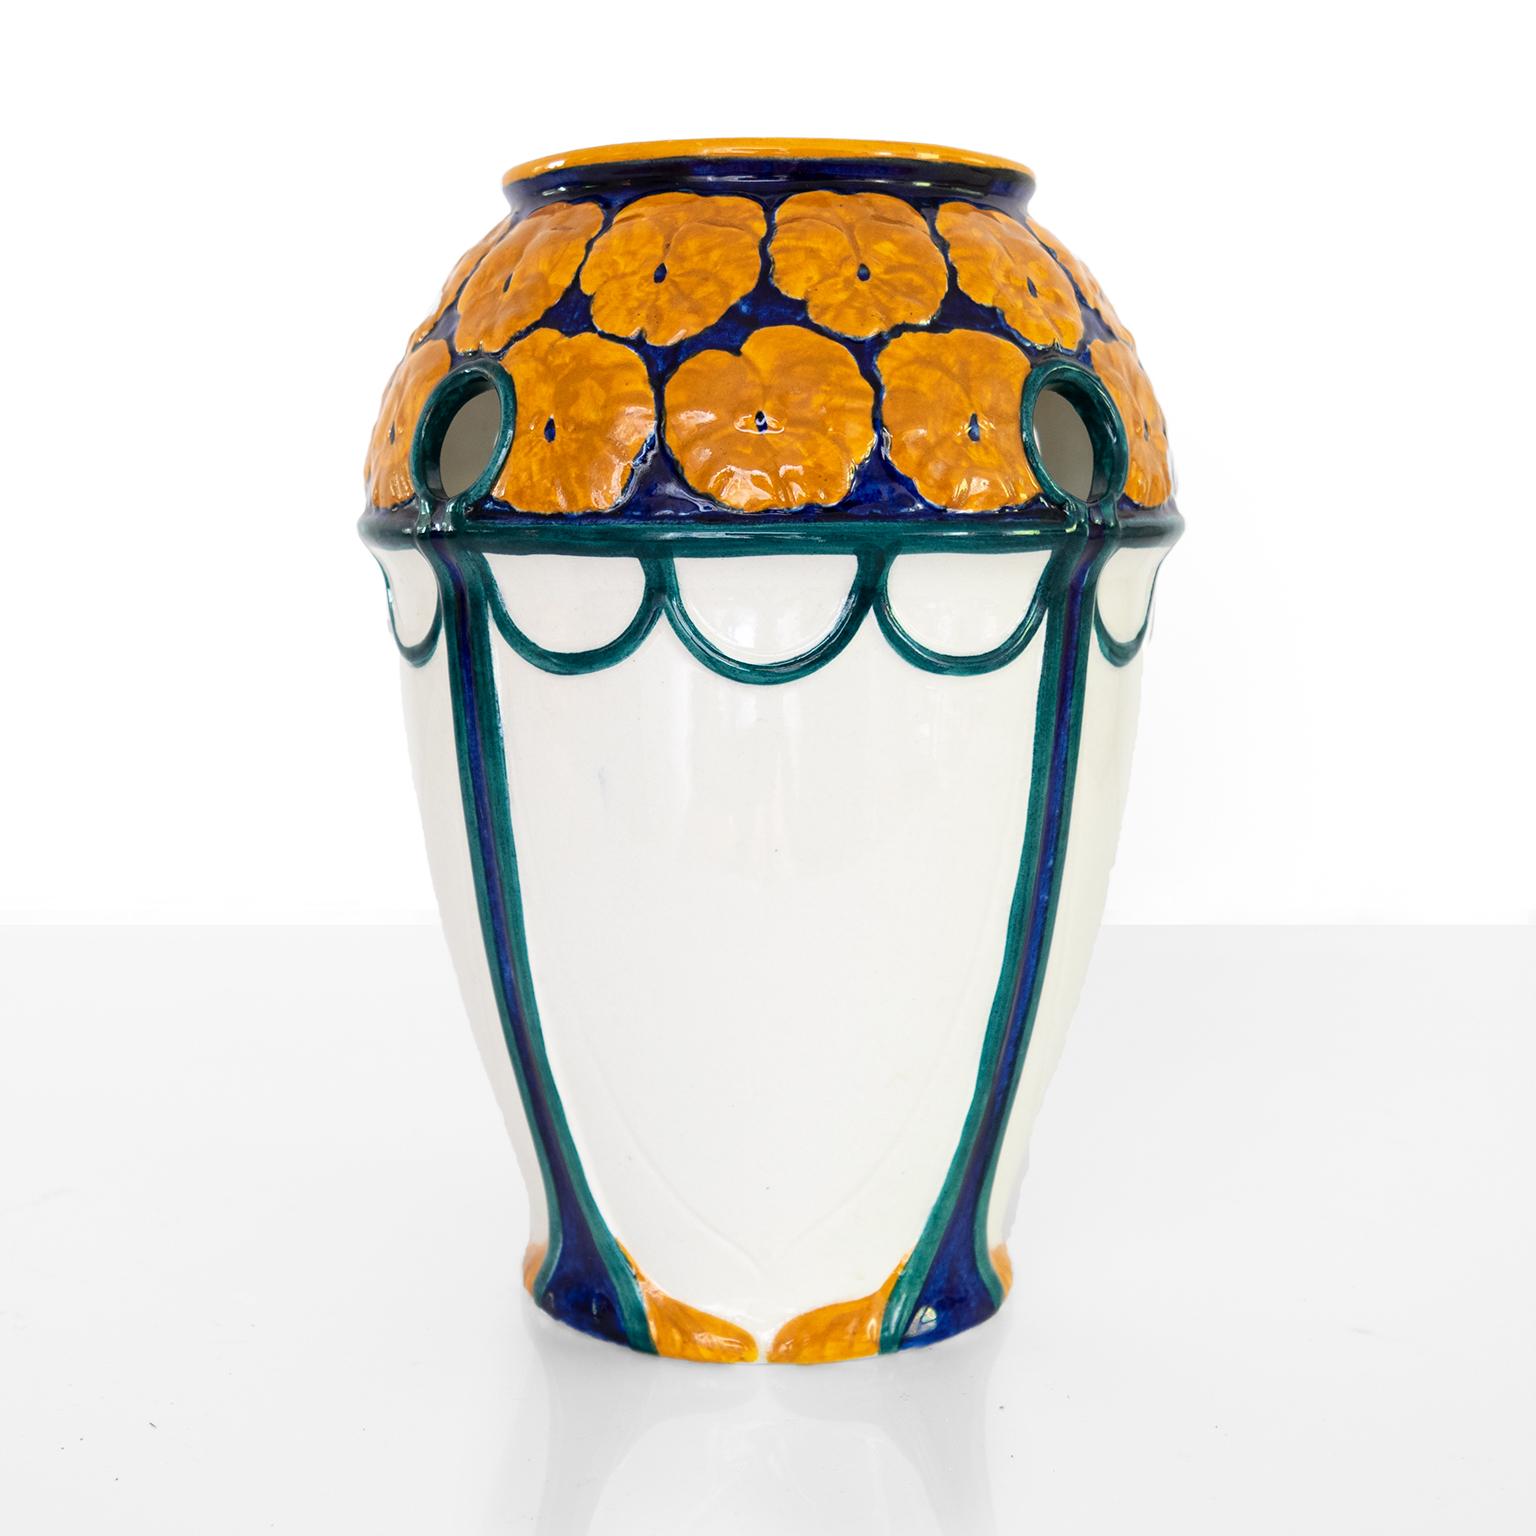 Swedish Art Nouveau period vase with a crown of orange flowers on a deep blue ground. The vase has small round openings along the top. Designed by Alf Wallander and made by Rorstrand, circa 1910. 

Measure: Height: 10.75”.